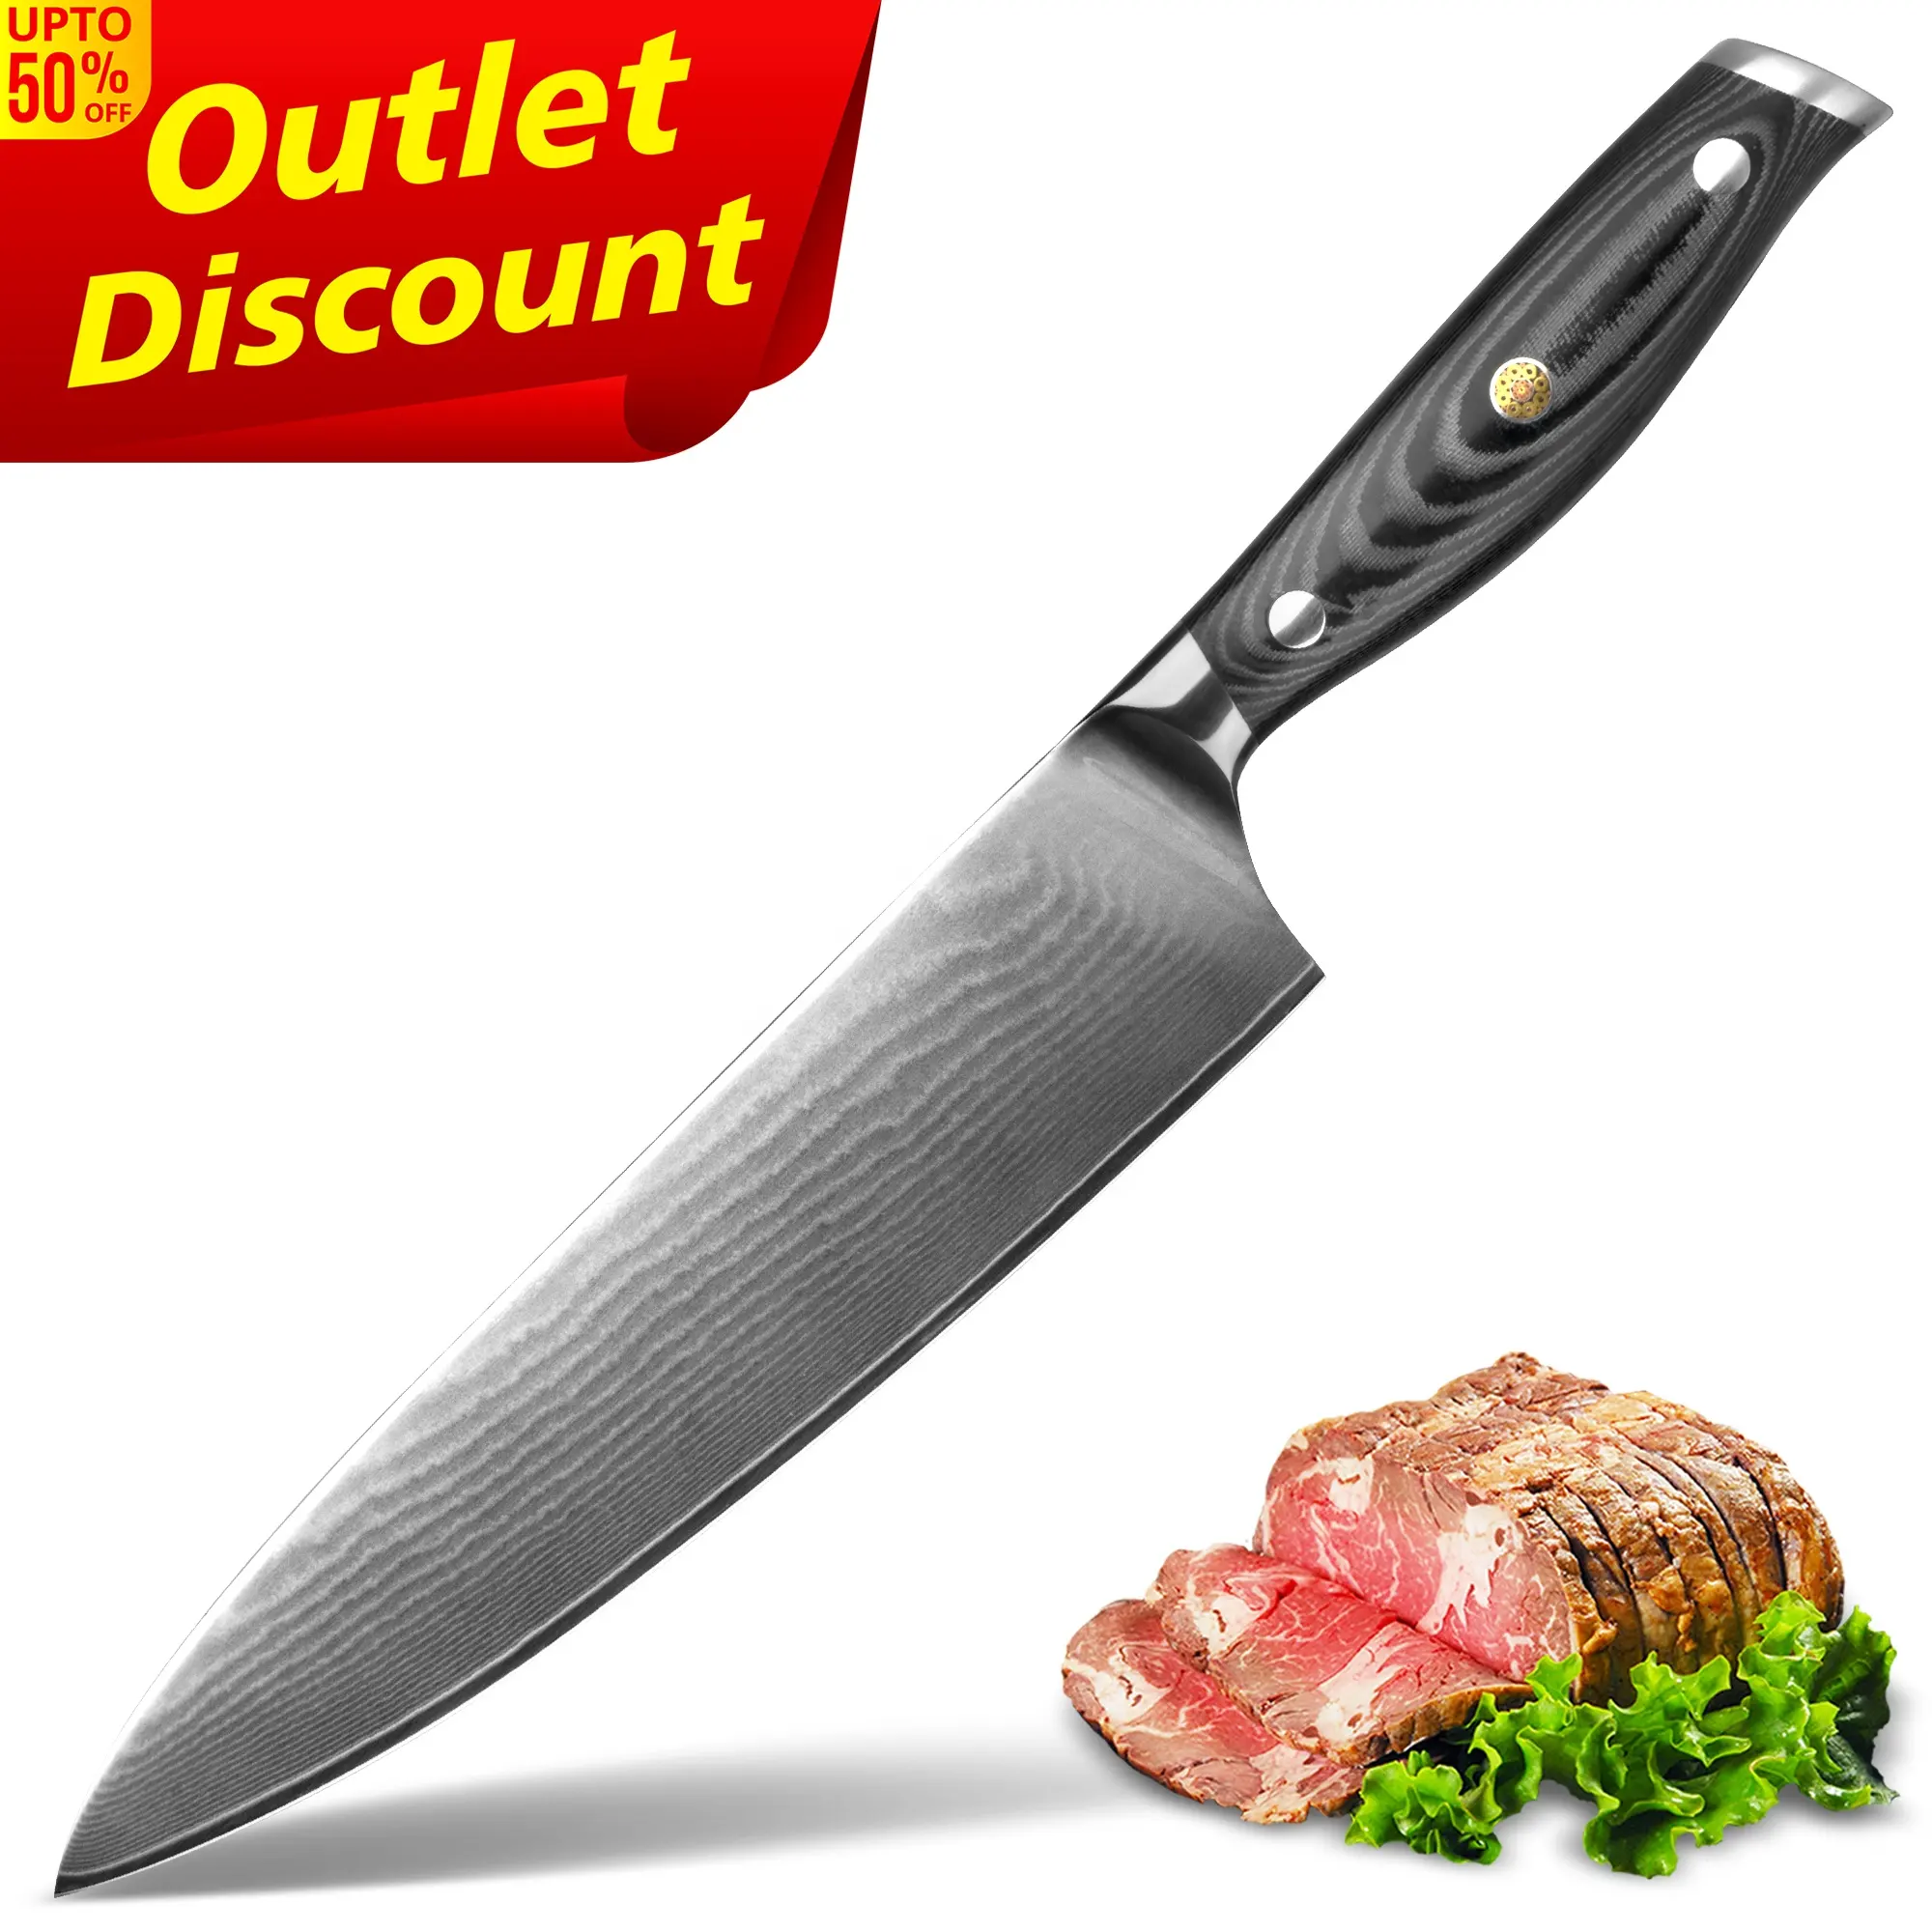 50% off Outlet Customized G10 handle japanese vg10 damascus 67 layers chef knife with logo gift box 001